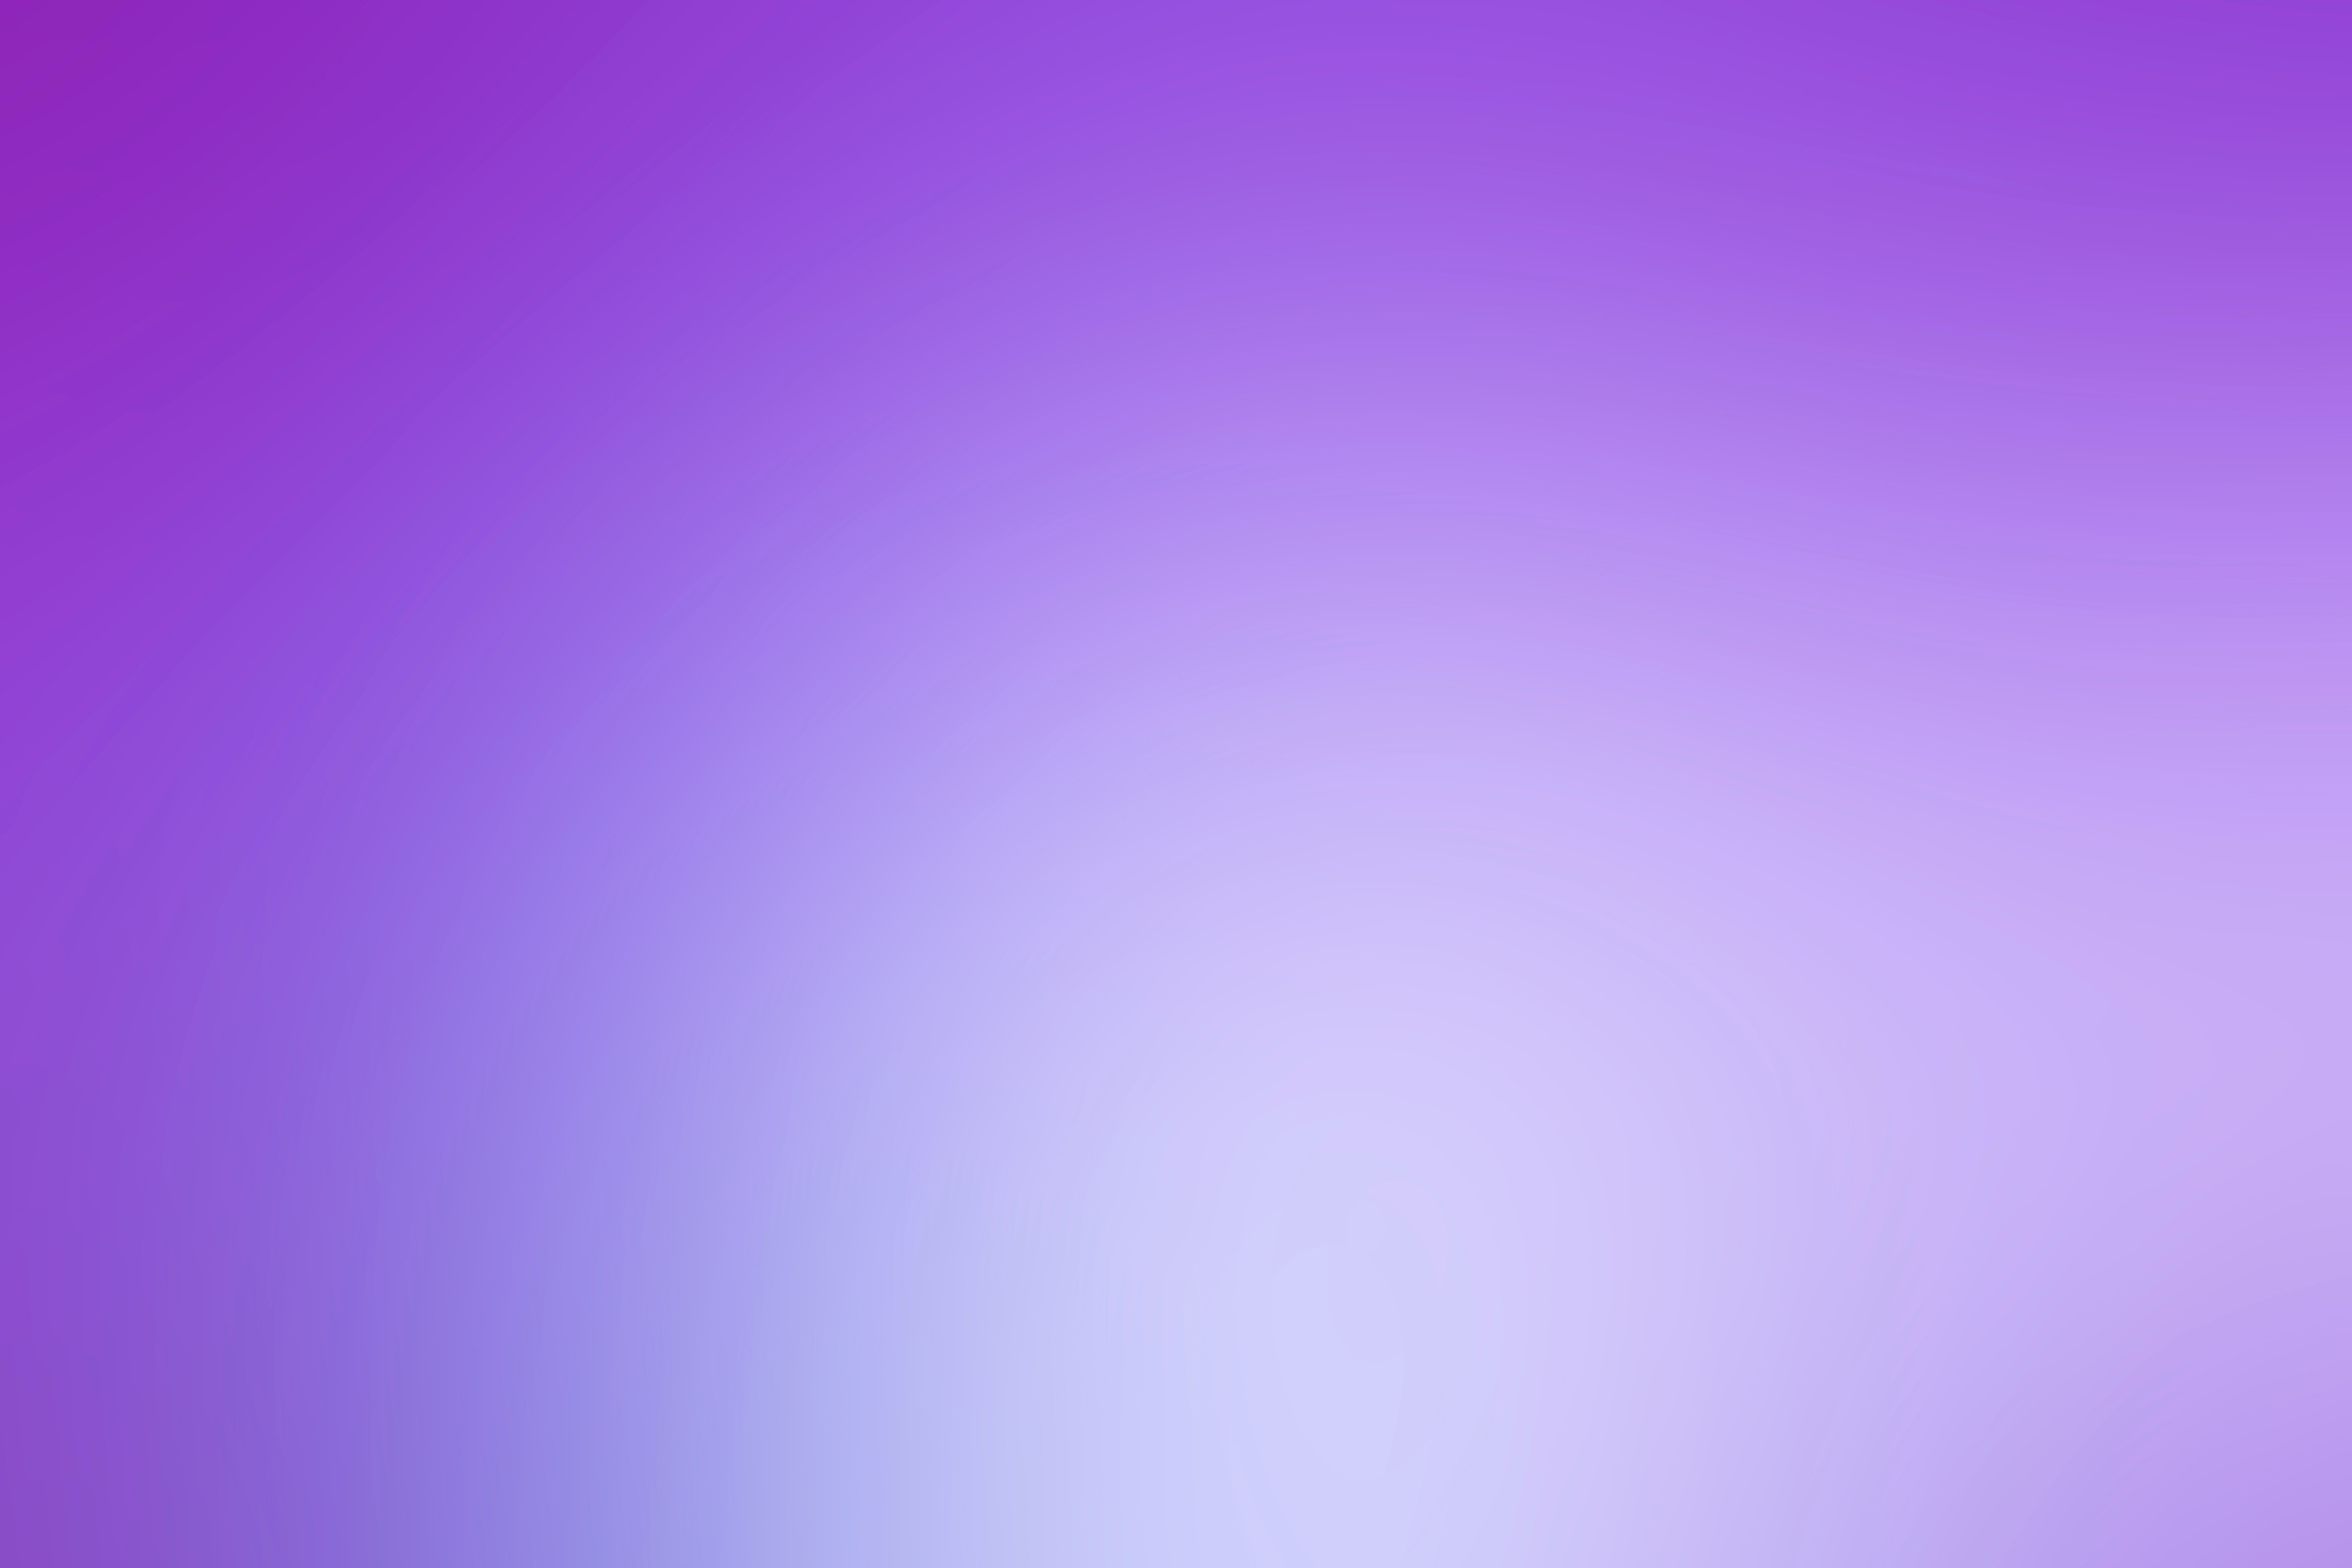 Colorful Smooth Twist Purple And Pink Texture Background